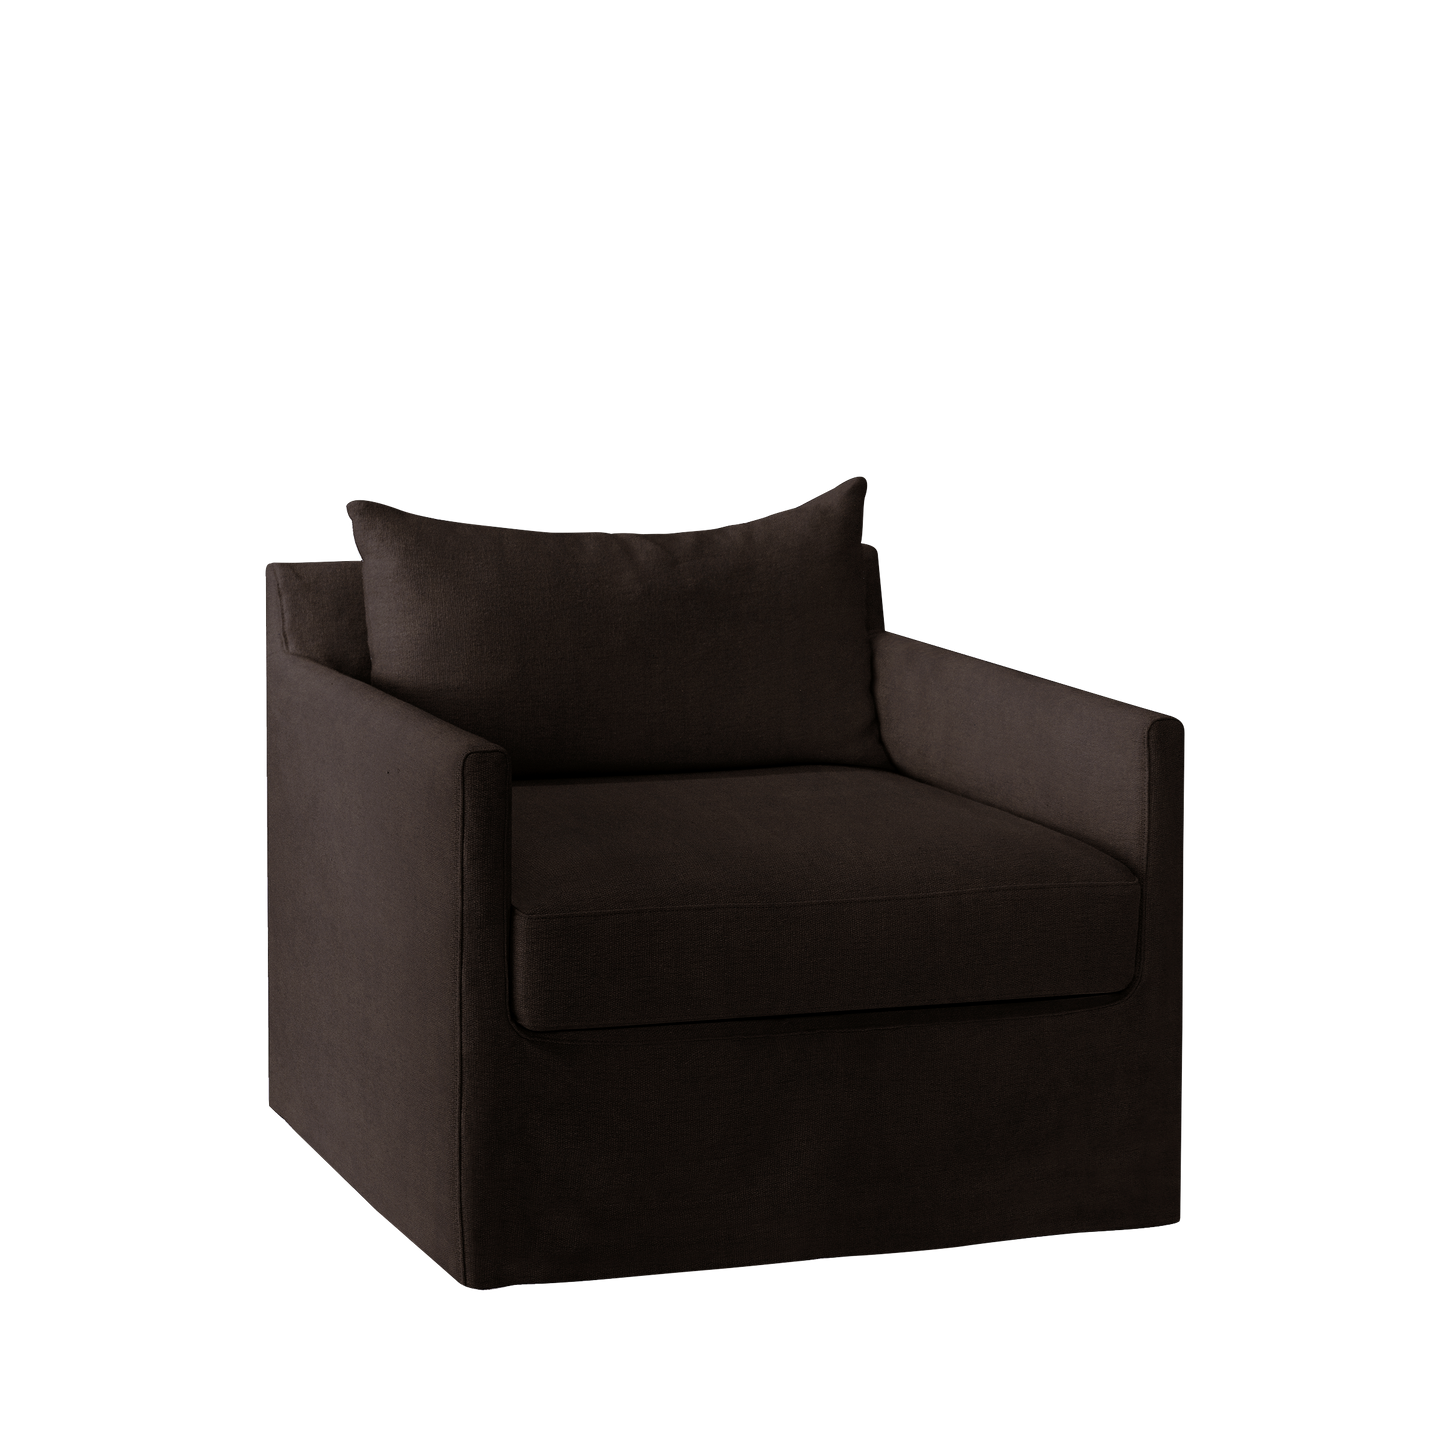 Extra wide Alba lounge chair with dark brown textile